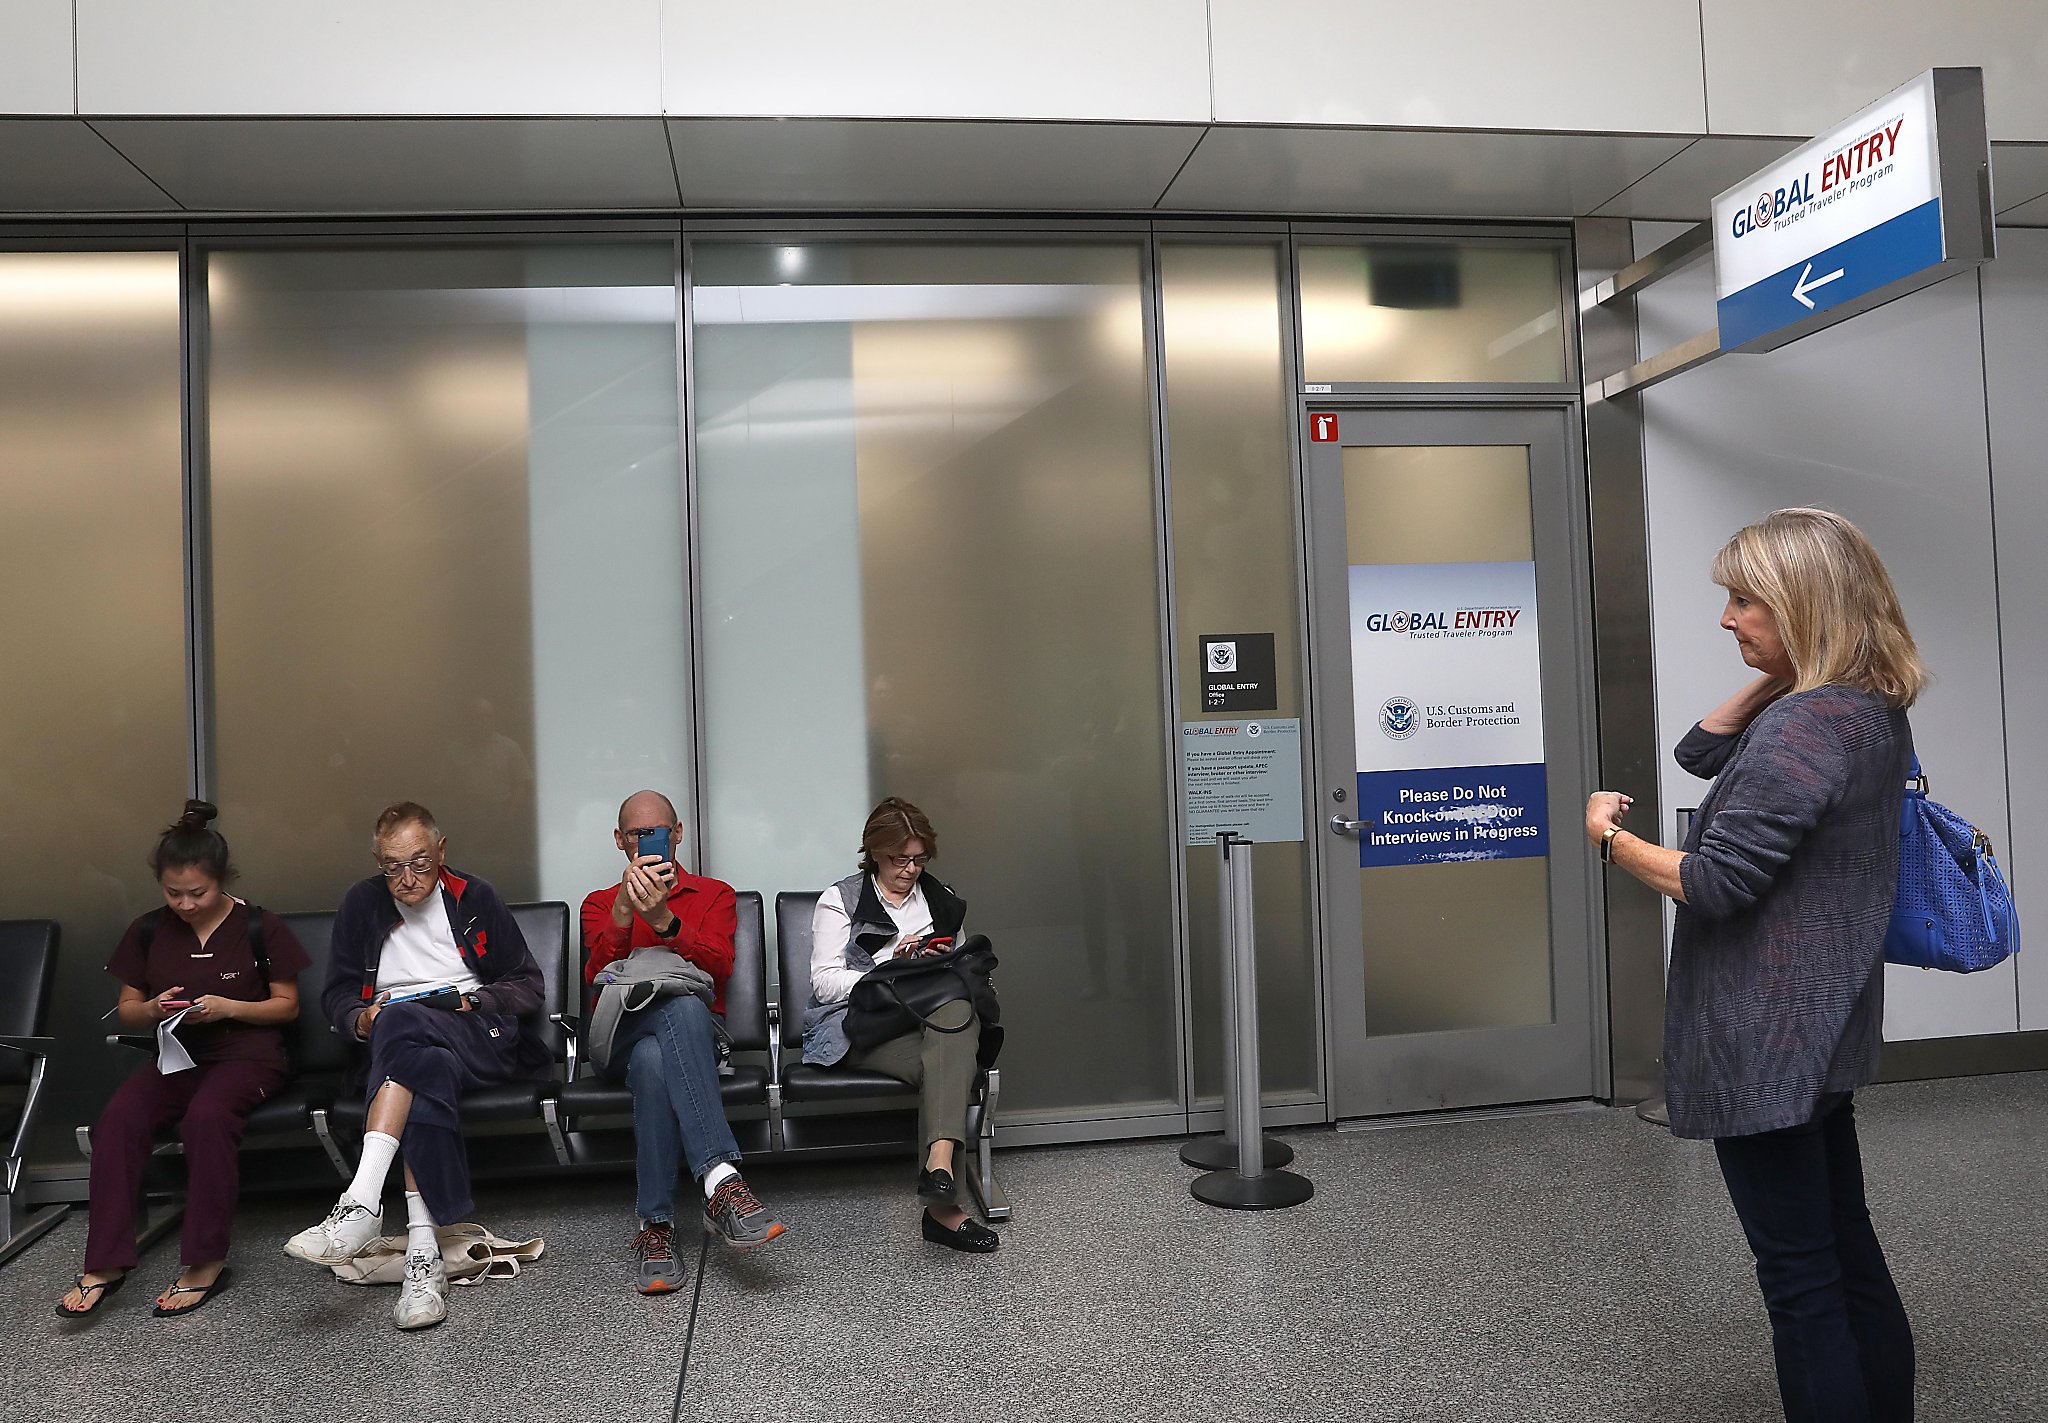 You can book a Global Entry interview at SFO through June 30